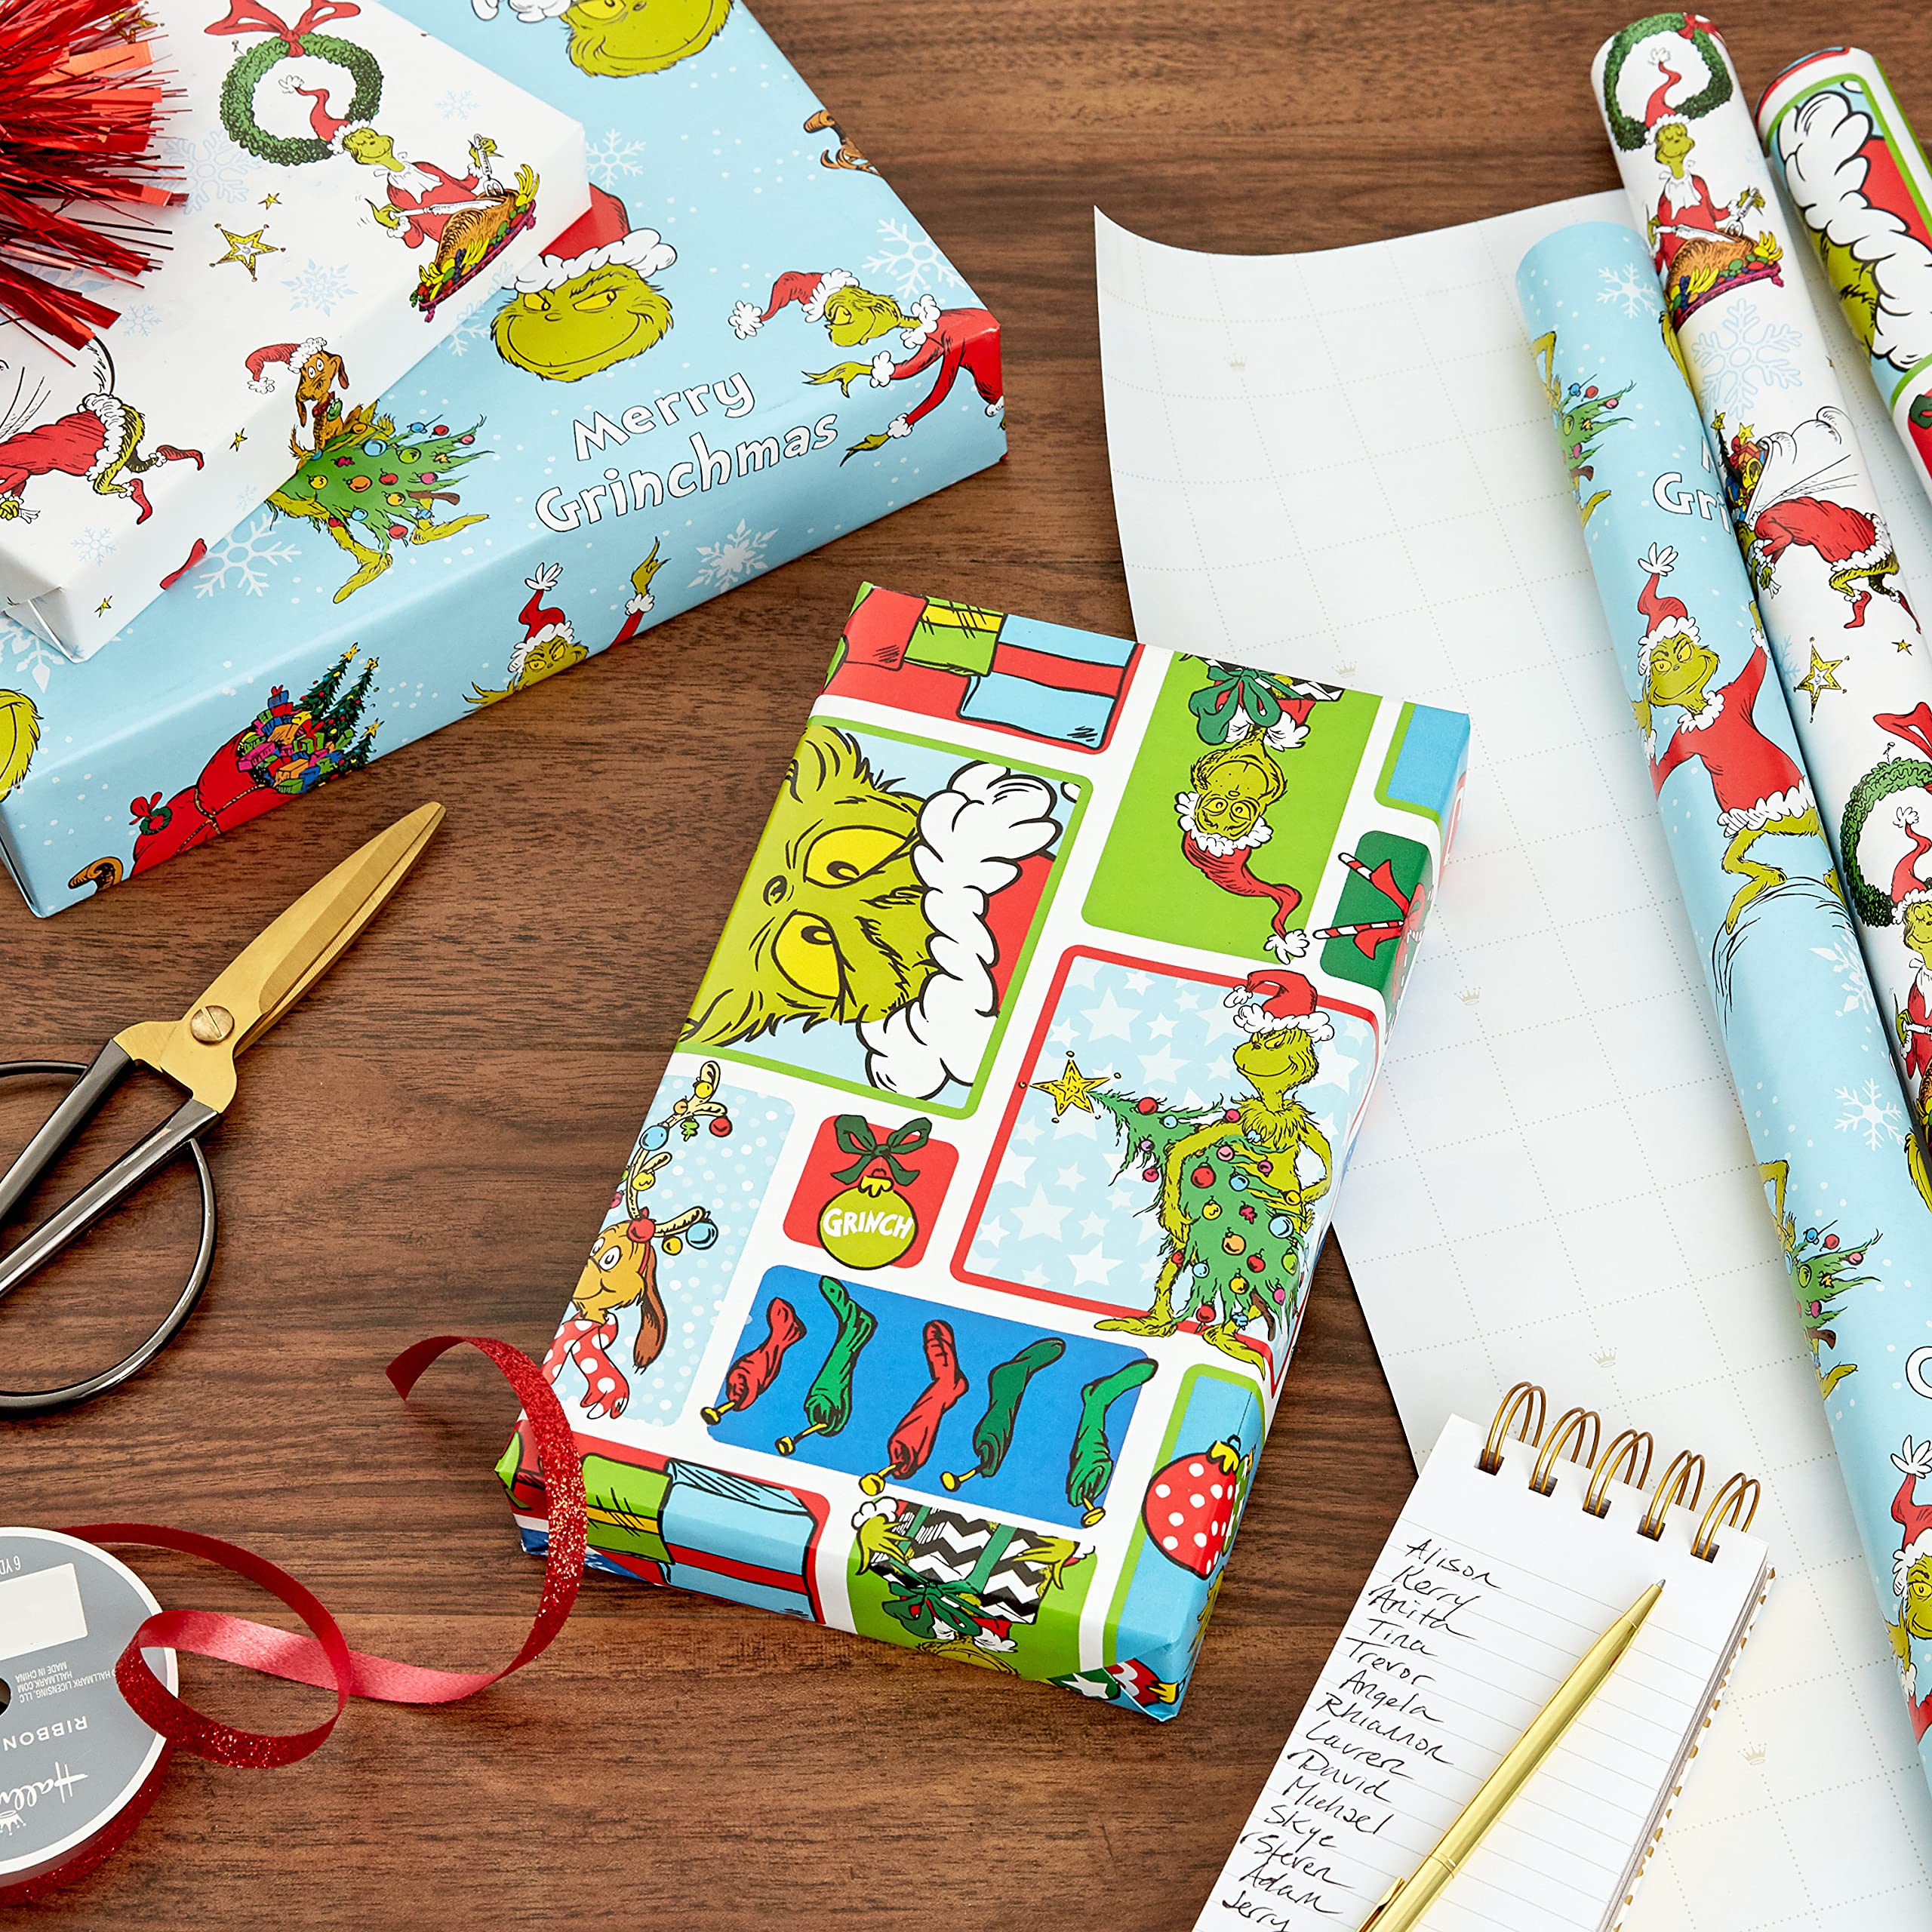 Hallmark Grinch Wrapping Paper for Kids (3 Rolls: 105 Sq. Ft. Ttl) for Christmas with Blue Tiles, White Snowflakes, Cindy Lou Who, Max